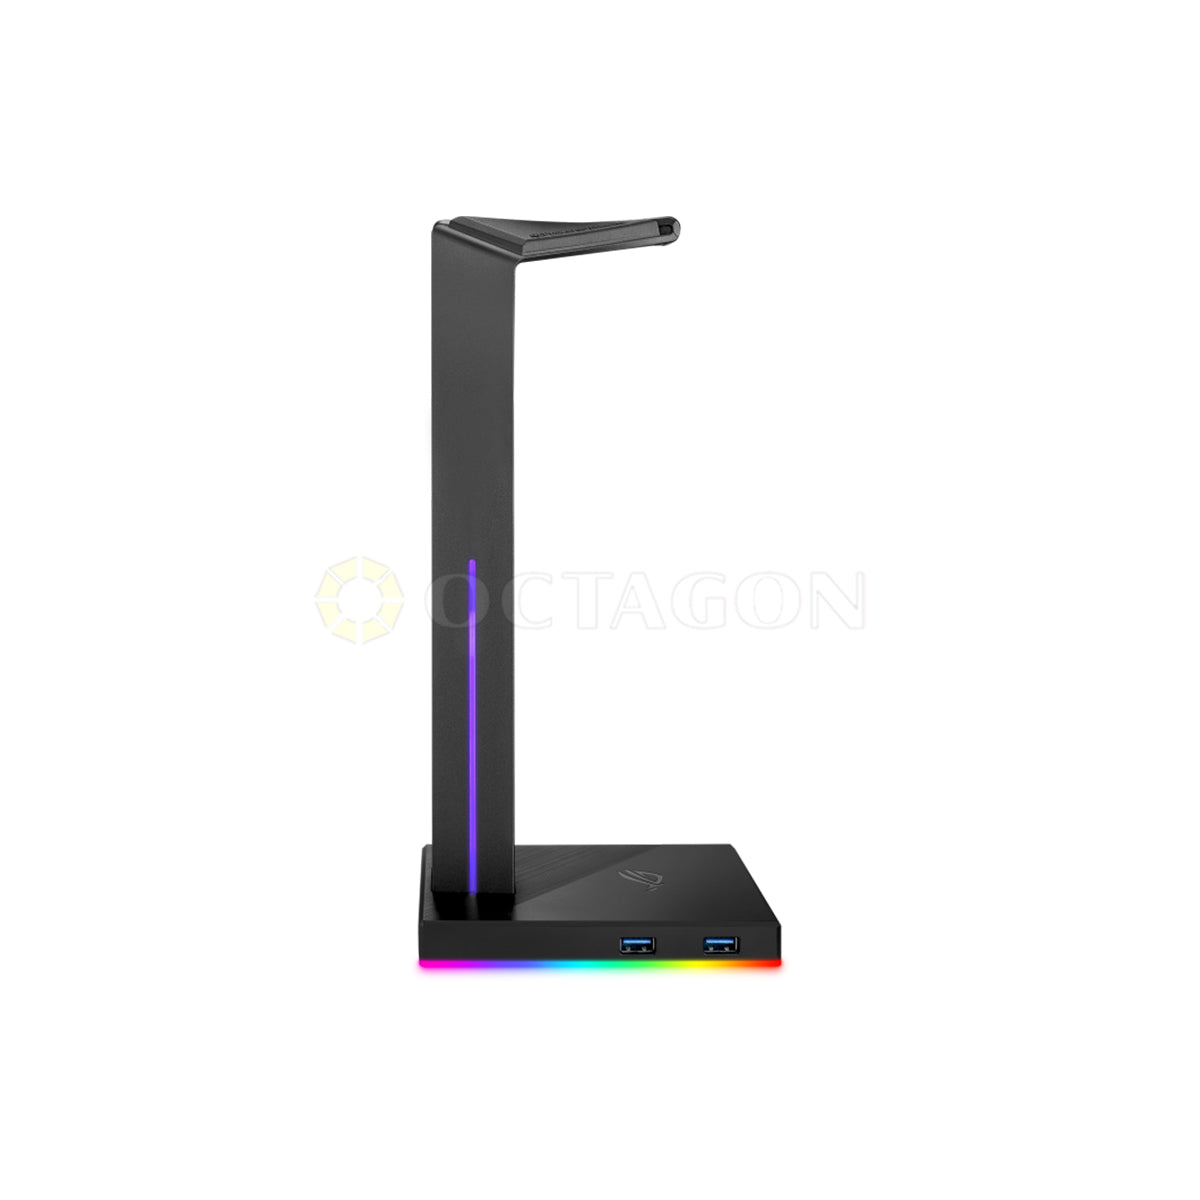 ASUS ROG THRONE RGB HEADSET STAND W/ USB PORT AND SOUND CARD